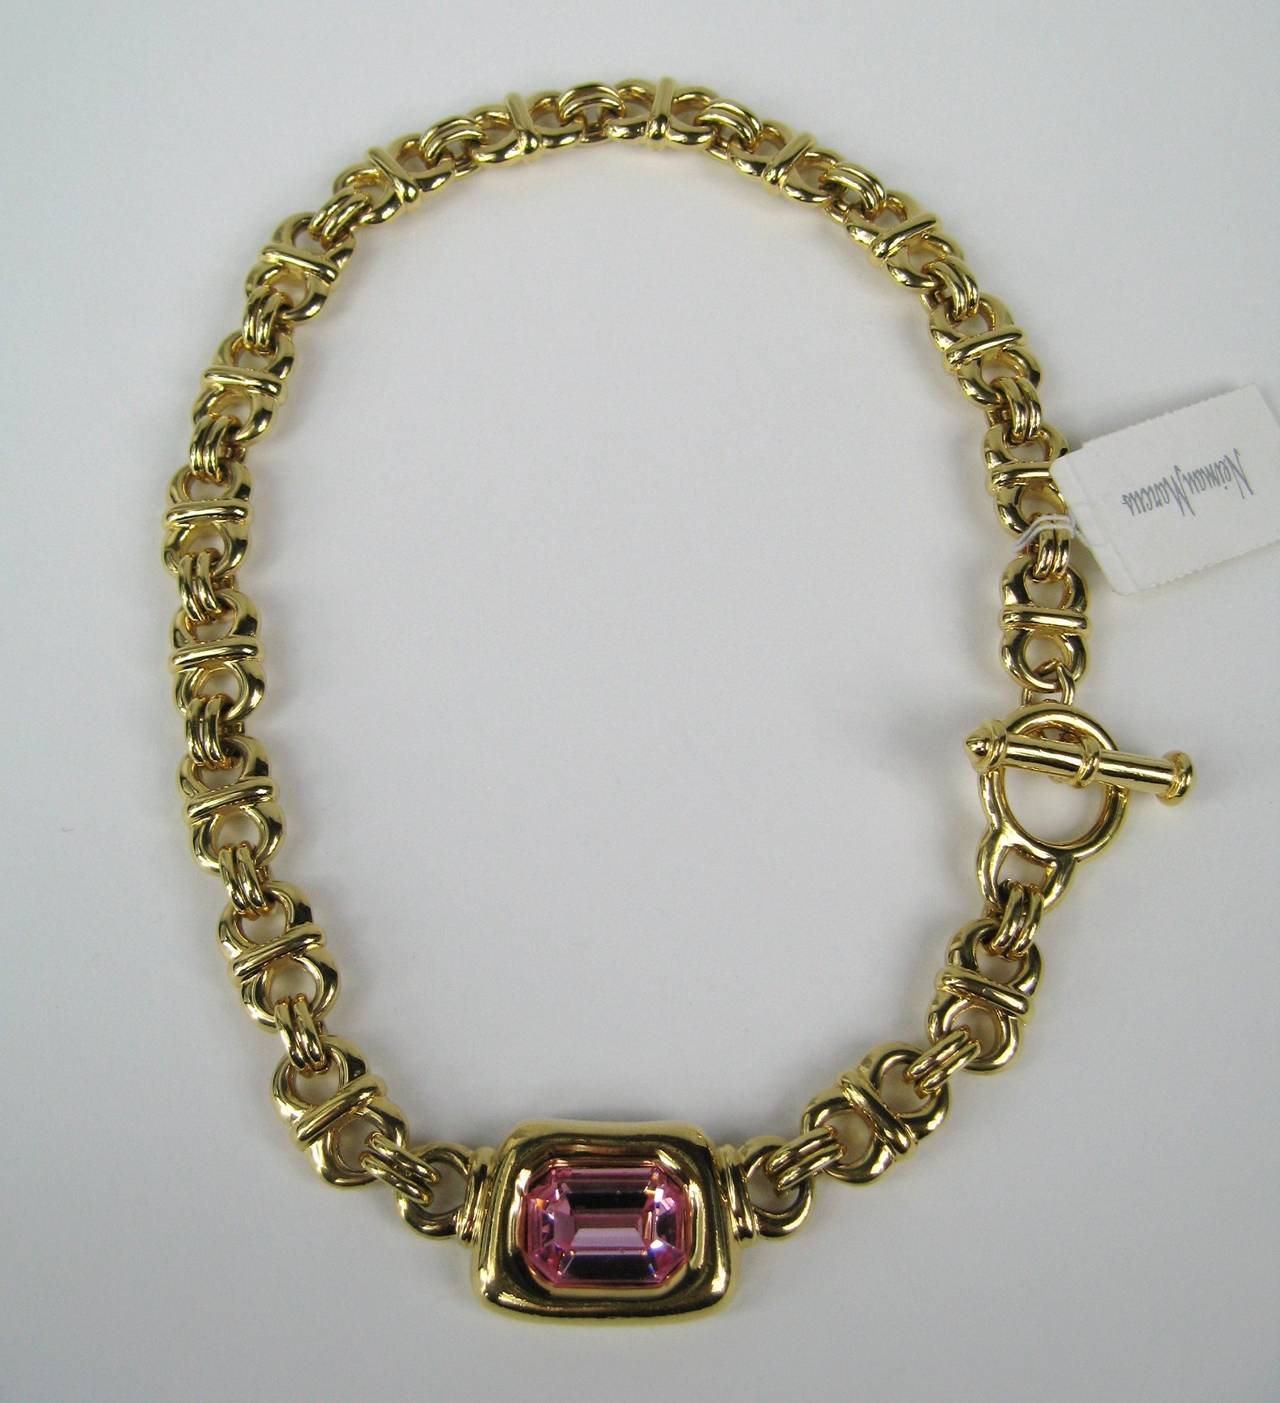 Large Pink Swarovski Crystal Necklace with toggle clasp. New Old Stock (never worn) Measures 18 inches  end to end Bezel measures  1.23 in x .92. This is out of a massive collection of Hopi, Zuni, Navajo, Southwestern, sterling silver, (costume